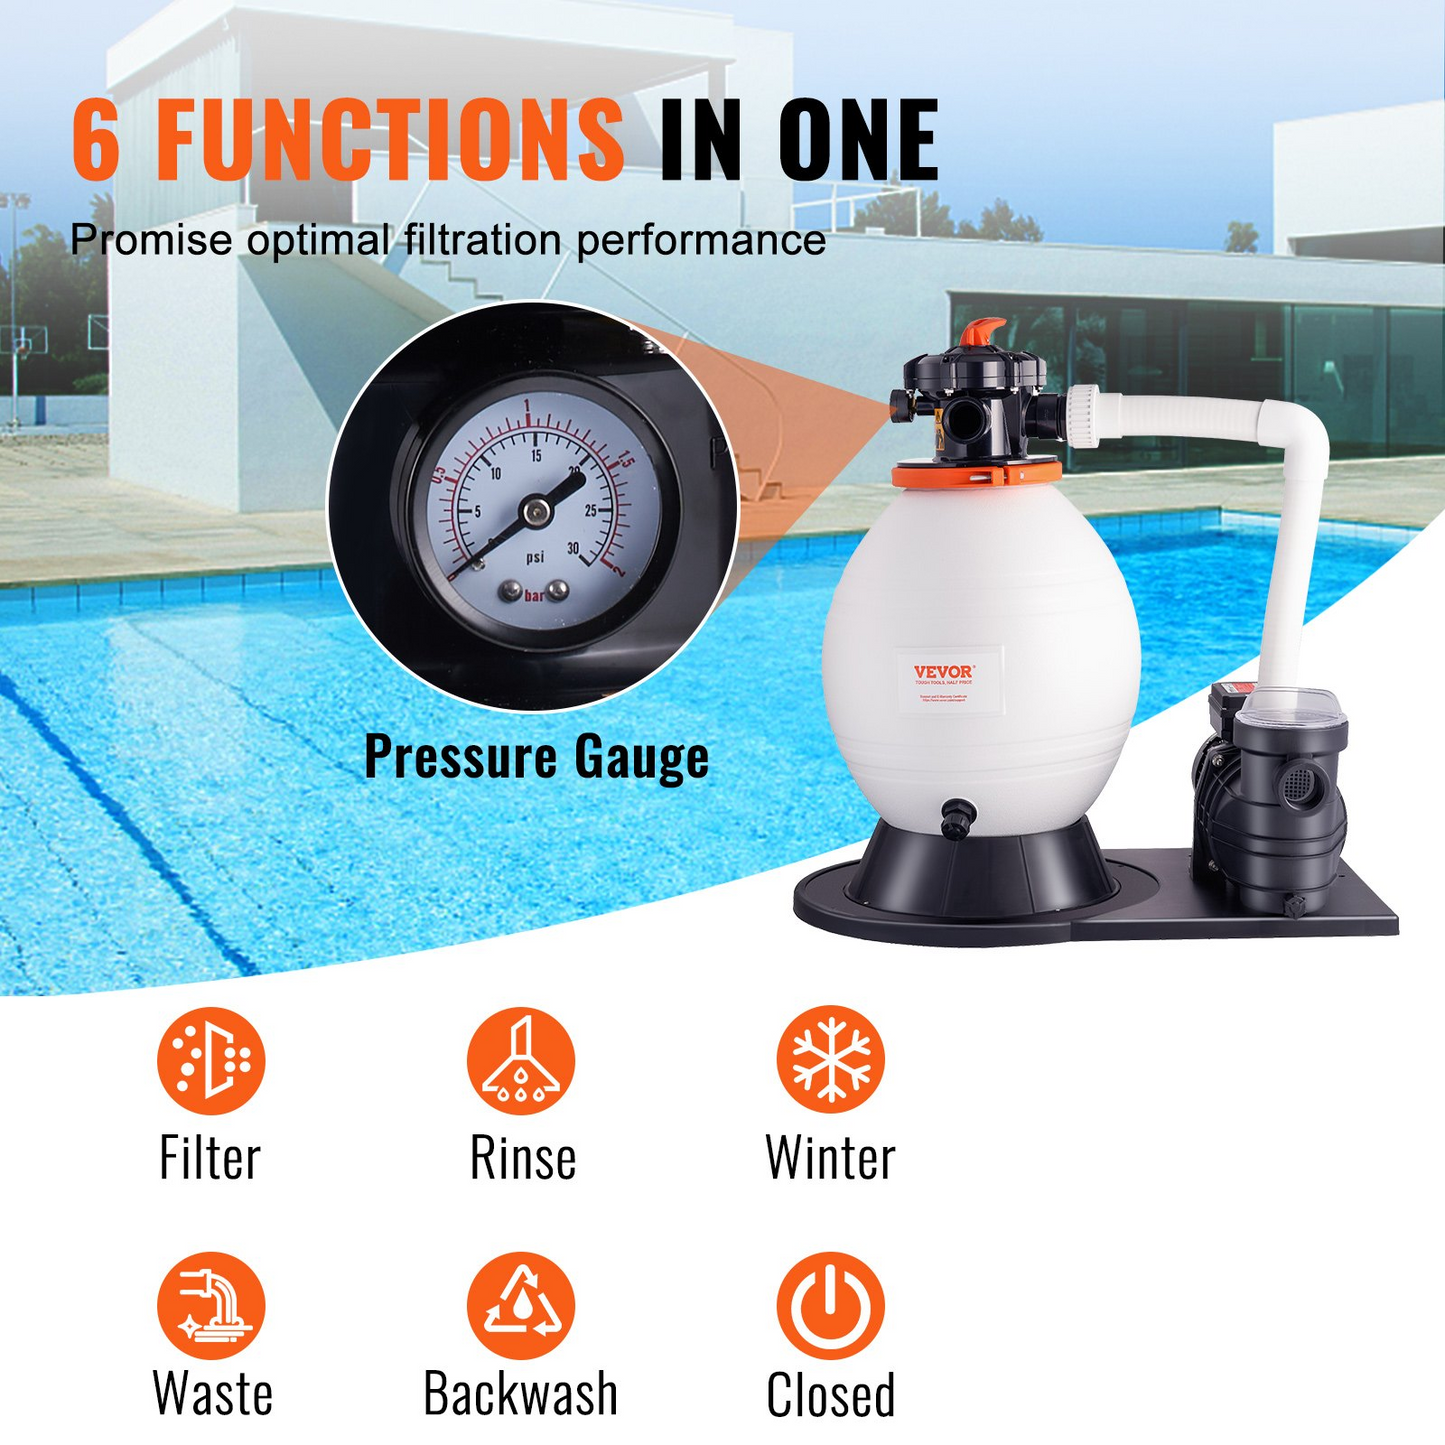 VEVOR Sand Filter Pump for Above Ground Pools, 16-inch, 3500 GPH, 1 HP Swimming Pool Pumps System & Filters Combo Set with 6-Way Multi-Port Valve and Strainer Basket, for Domestic and Commercial Pools, Goodies N Stuff